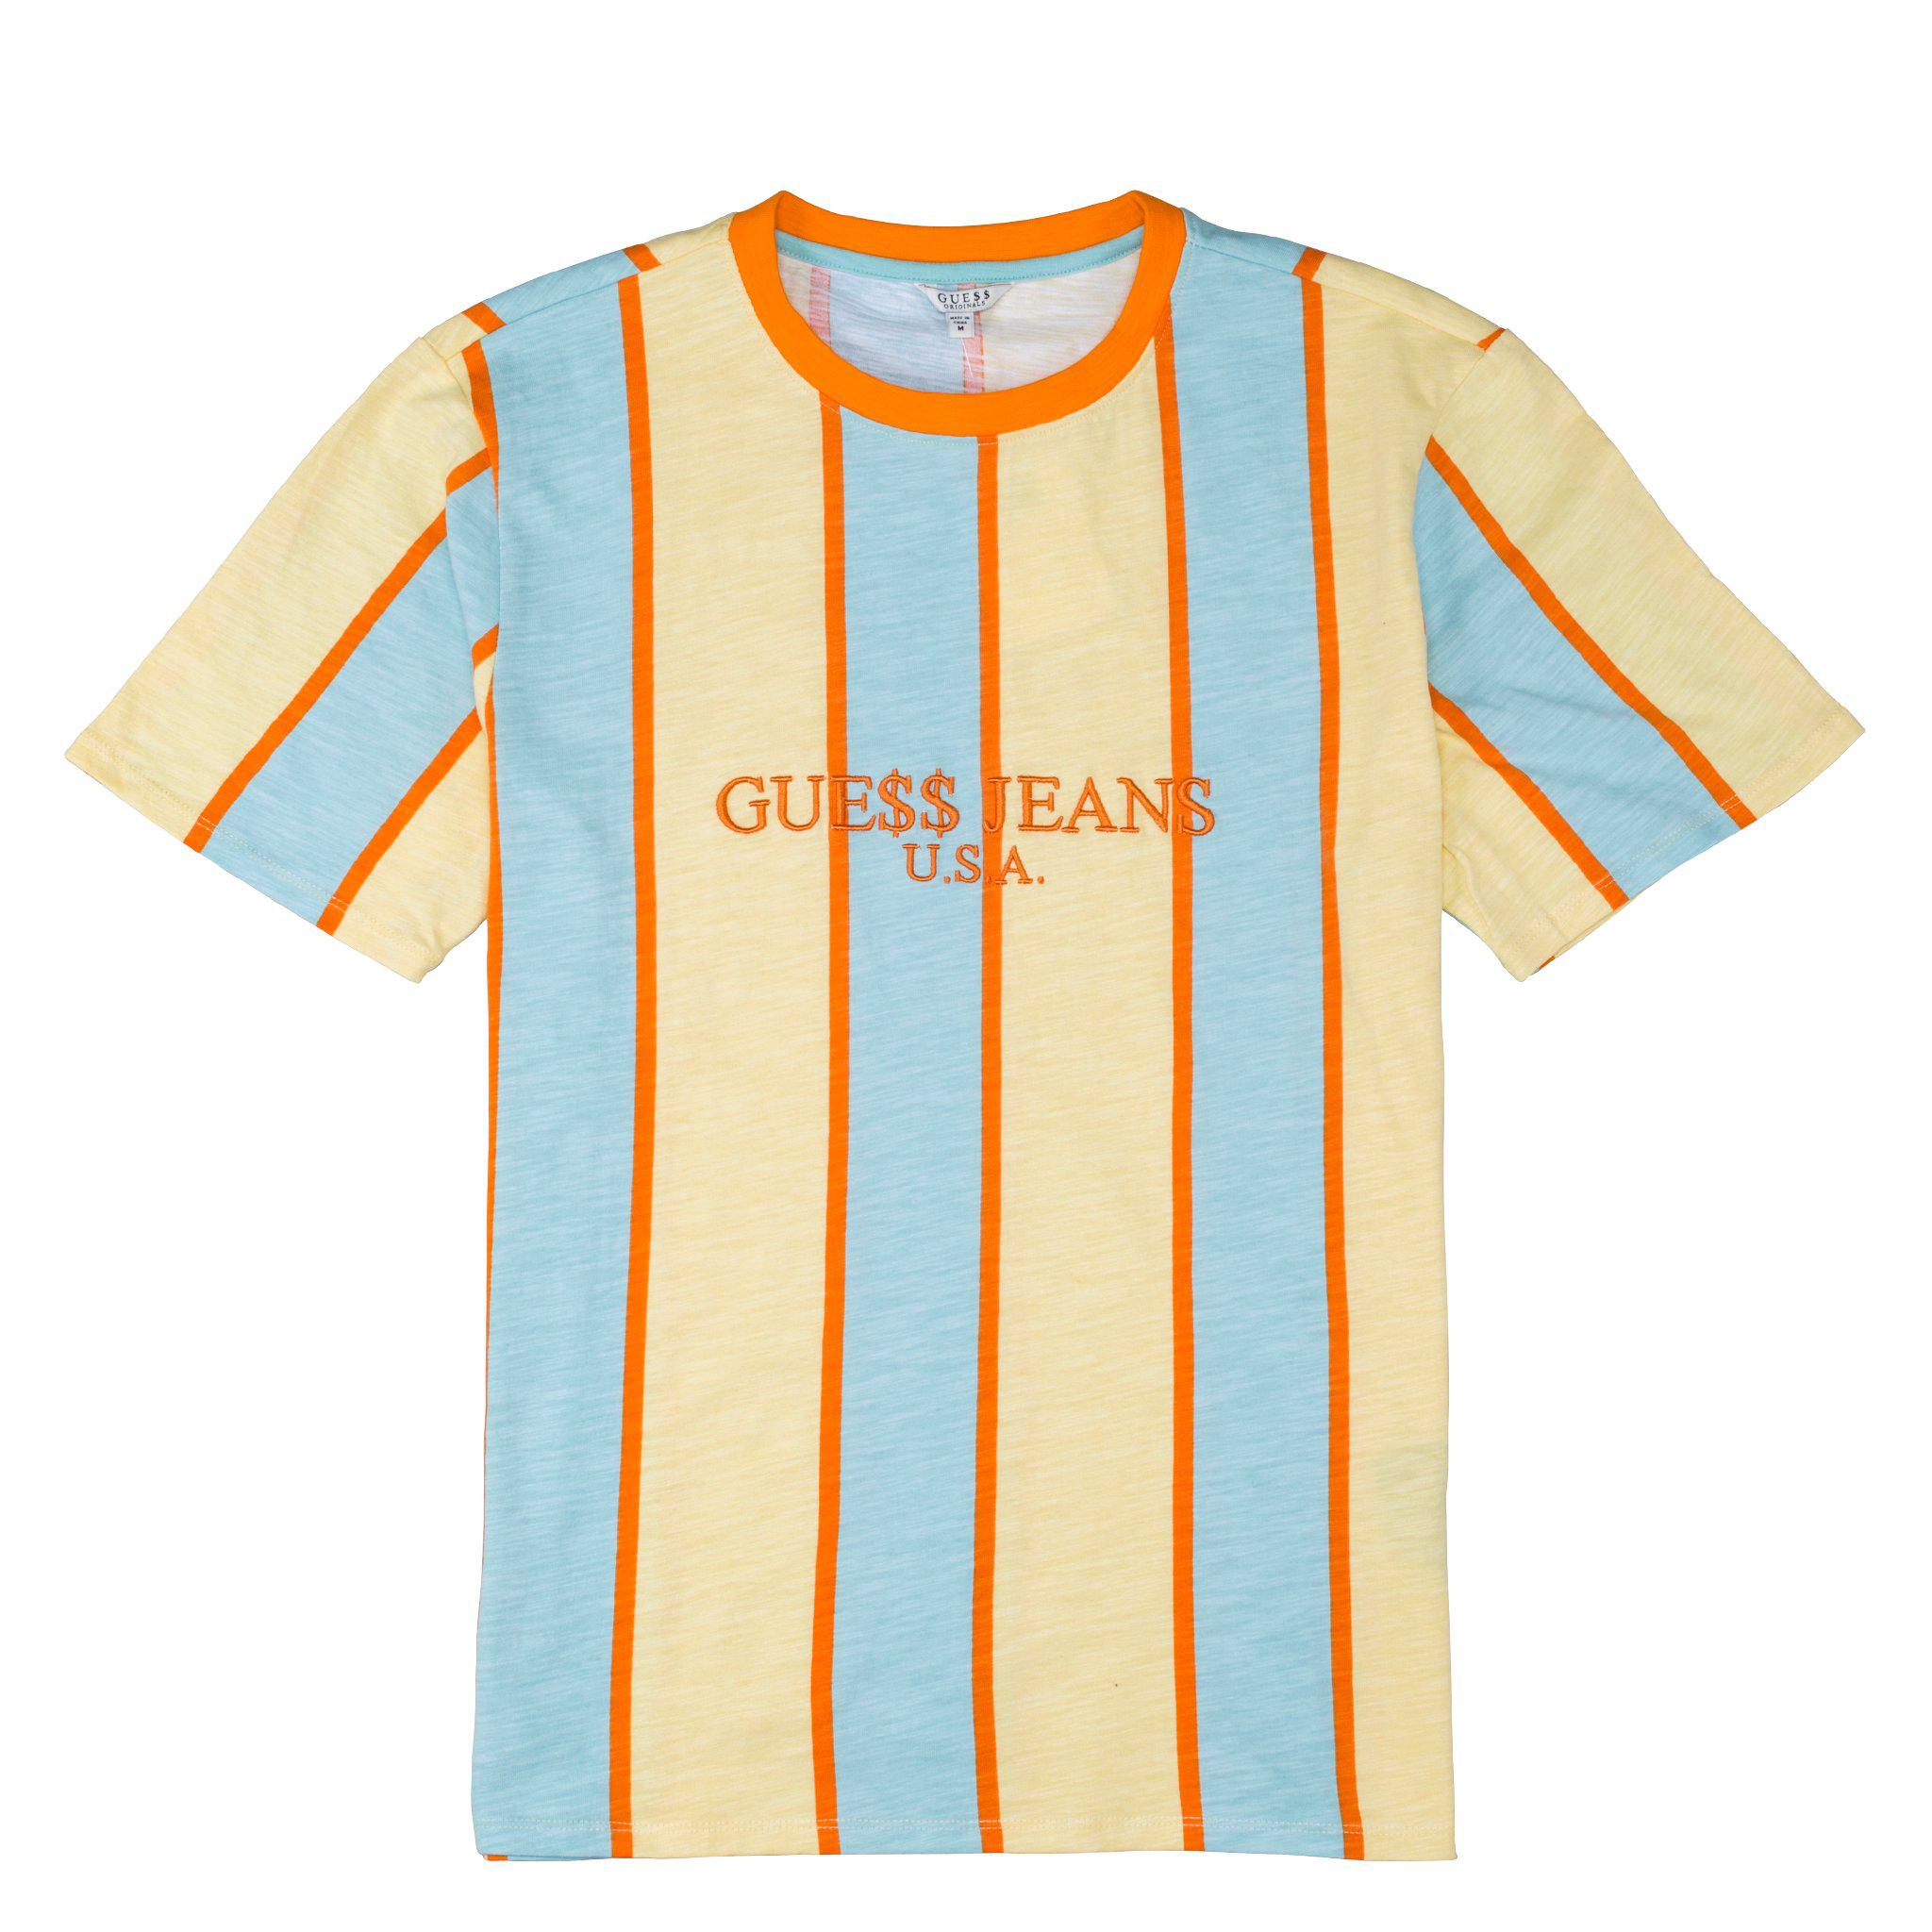 Online Guess Jeans Usa Striped T Shirt Hong Kong Brookline Dress Stores In The Usa - green and black striped shirt roblox